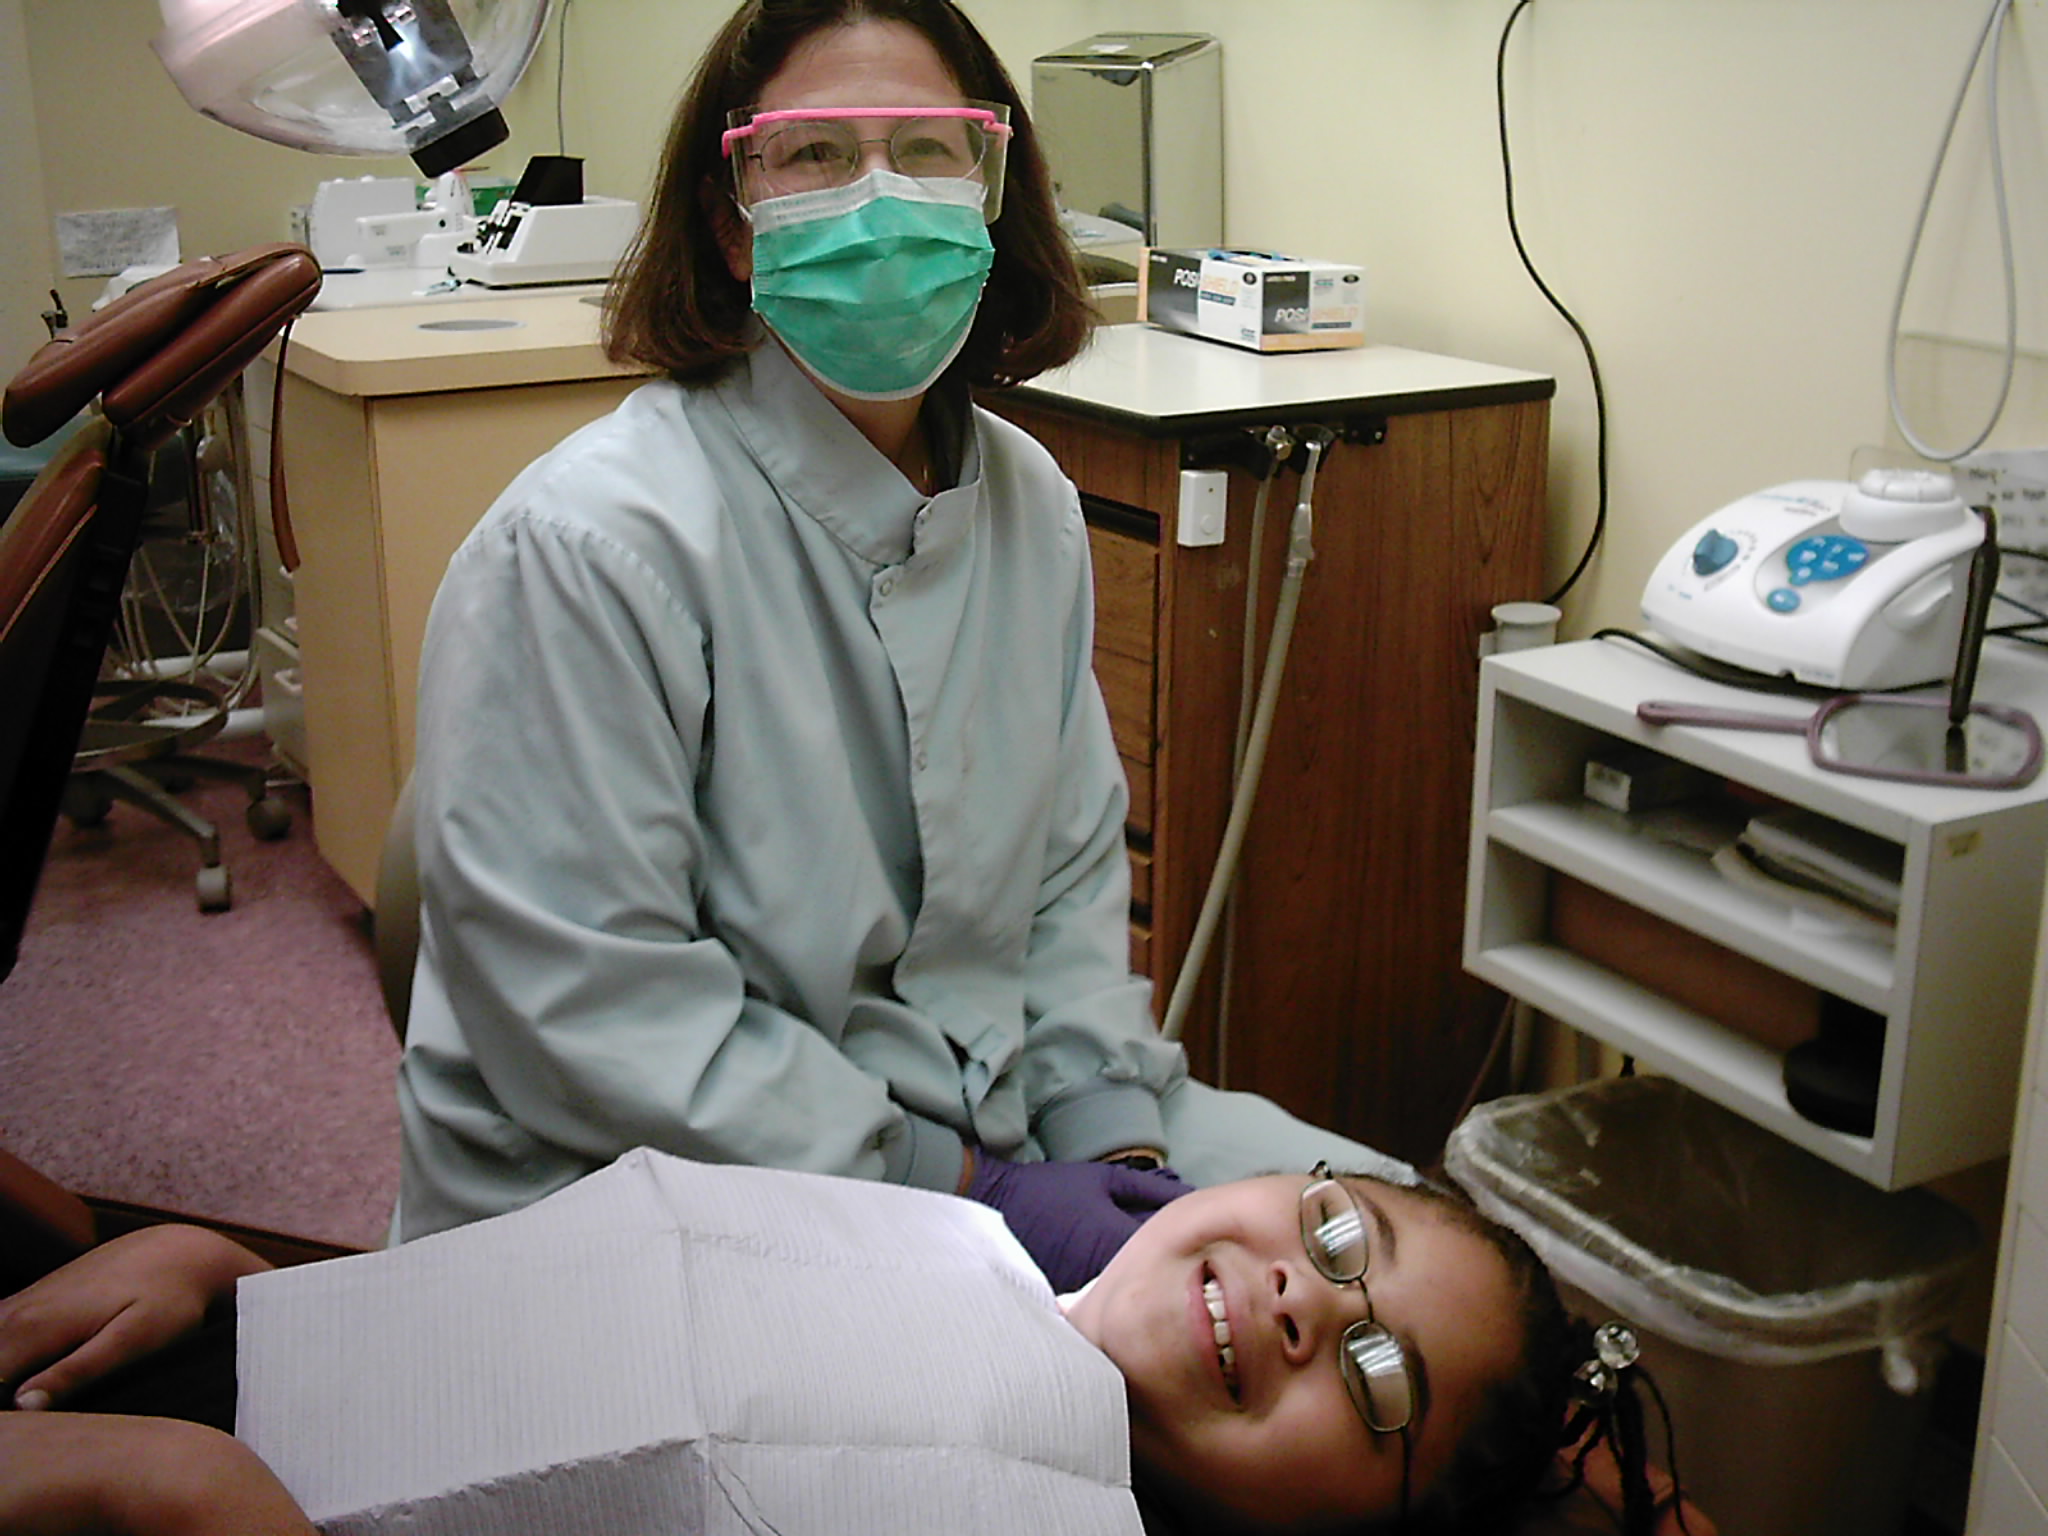 A dentist poses in a dentist office with a young patient receiving dental care. The dentist in the background is wearing a mask, gloves, and a dentist uniform. The young patient is lying down on a dentist chair wearing glasses and is smiling with a napkin covering her shirt.